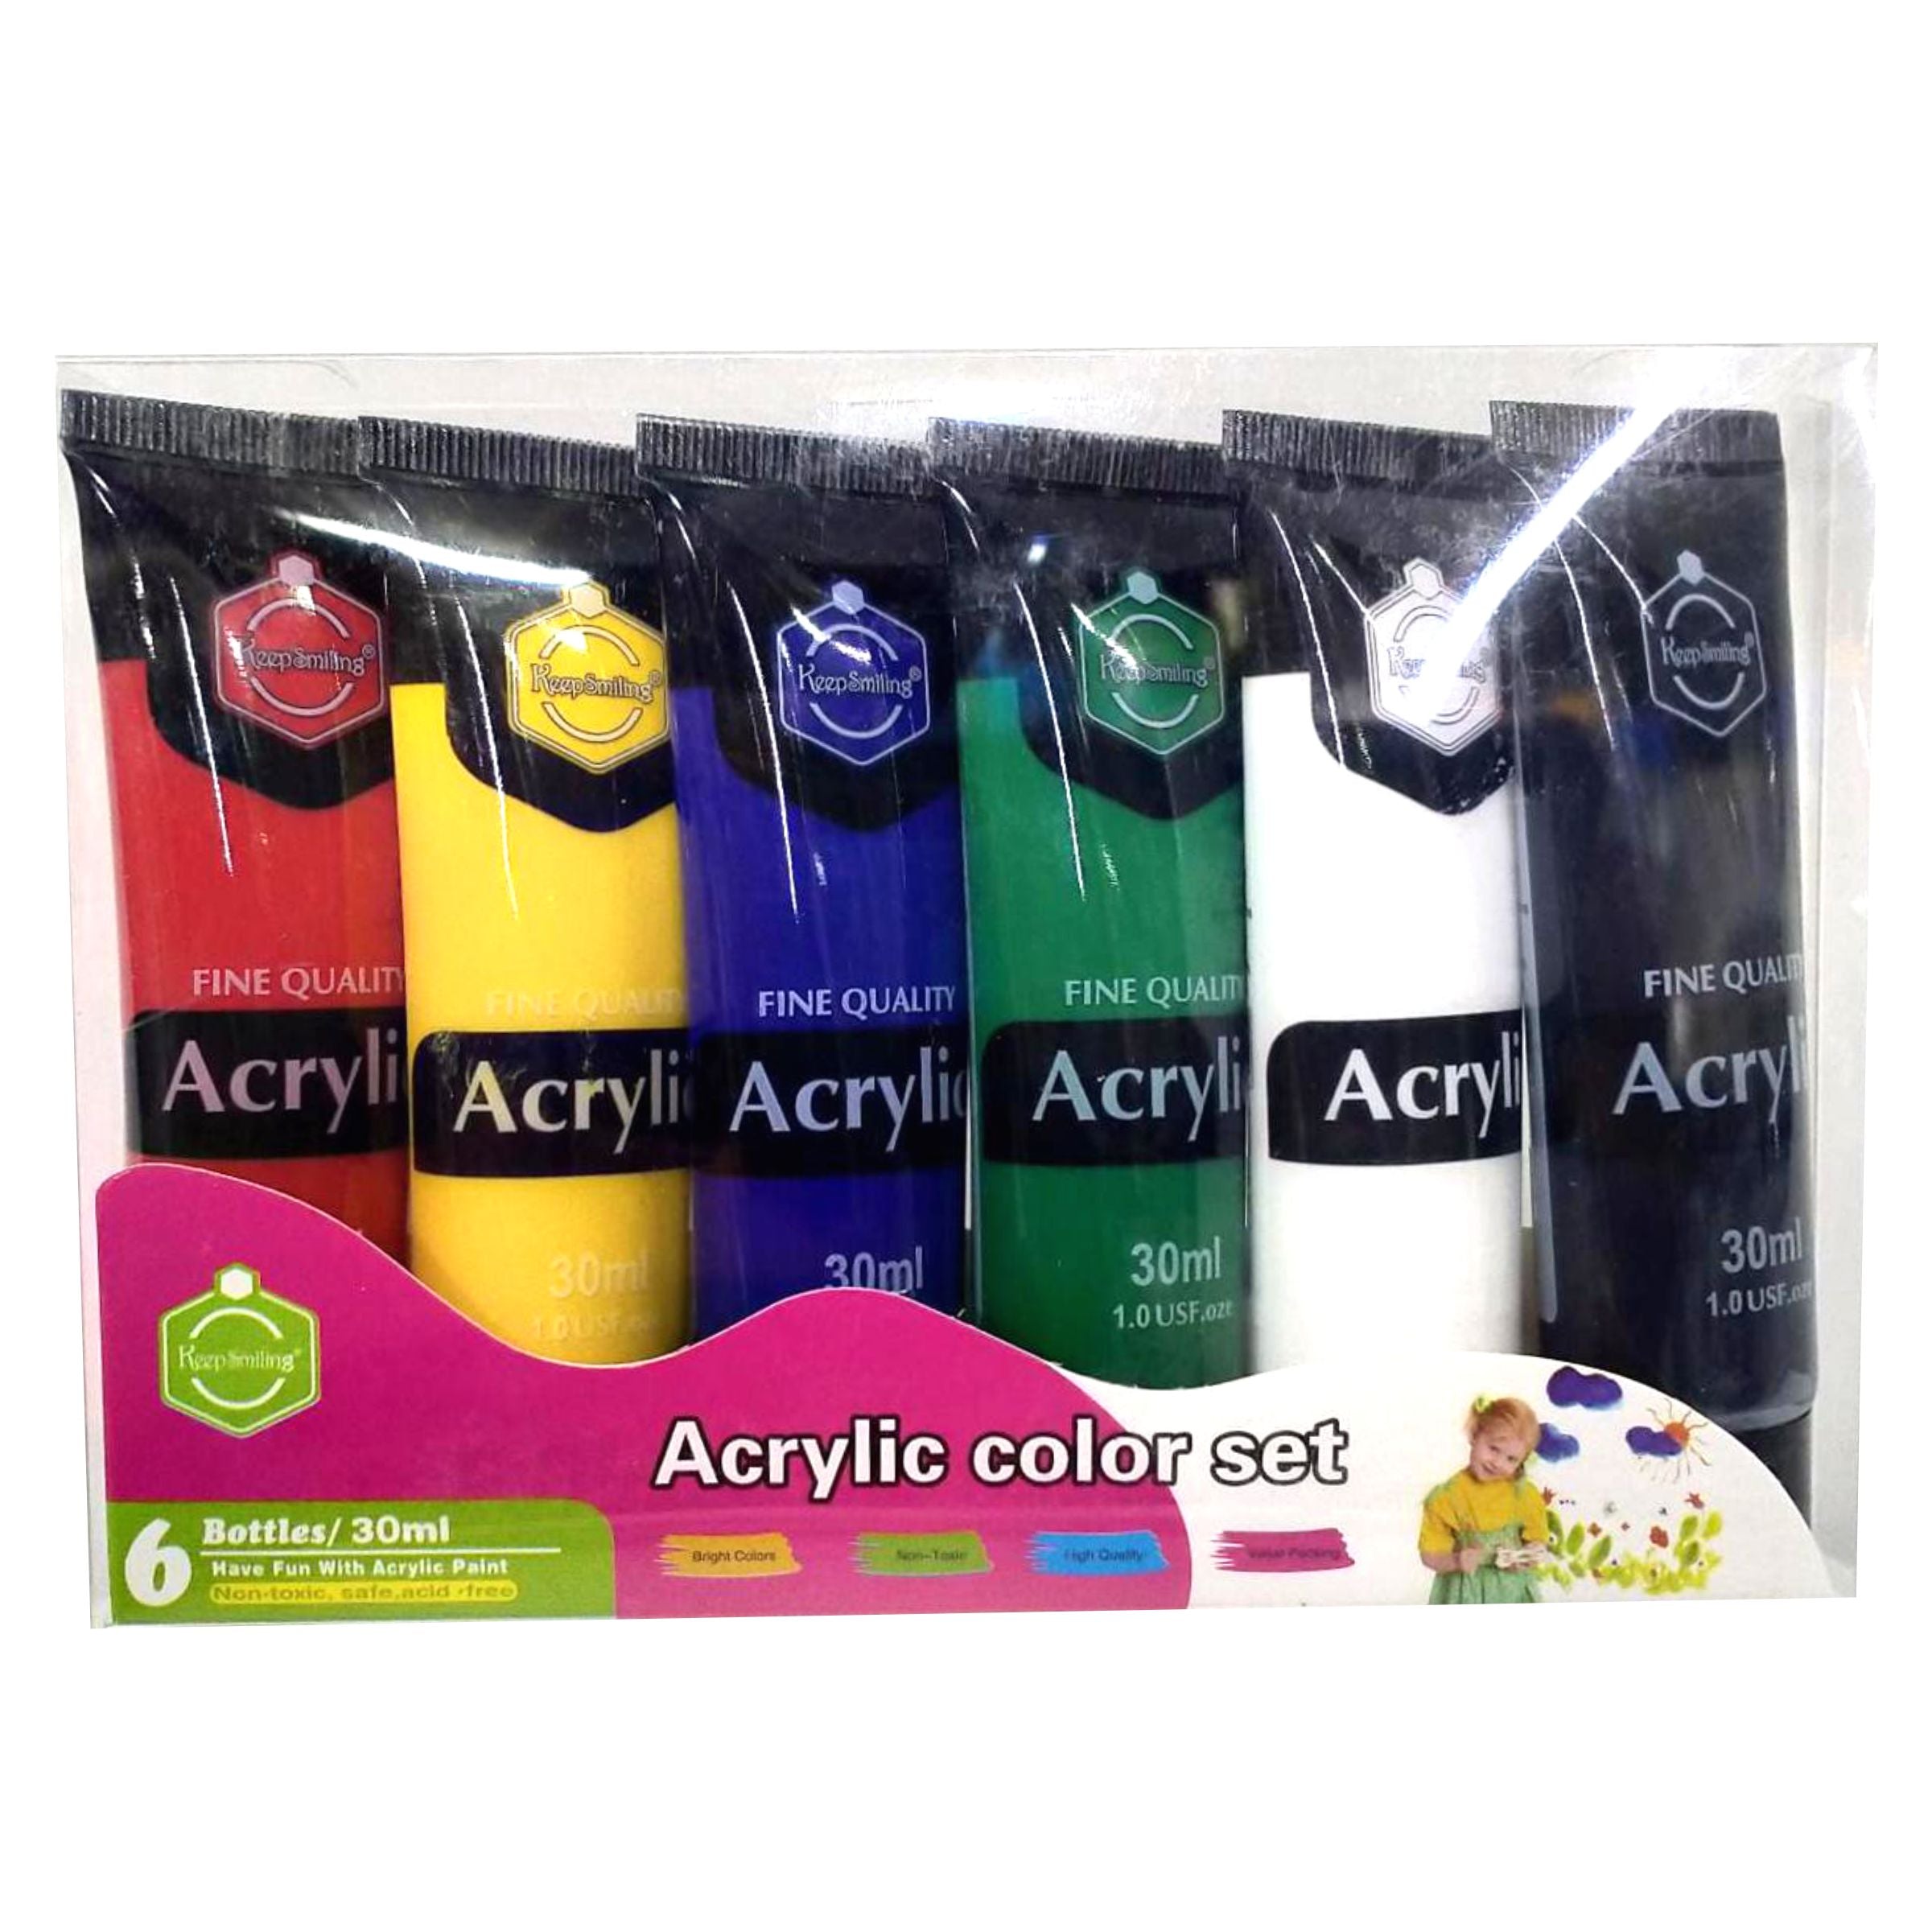 Keep Smiling Acrylic Paints 30ml Pack of 6